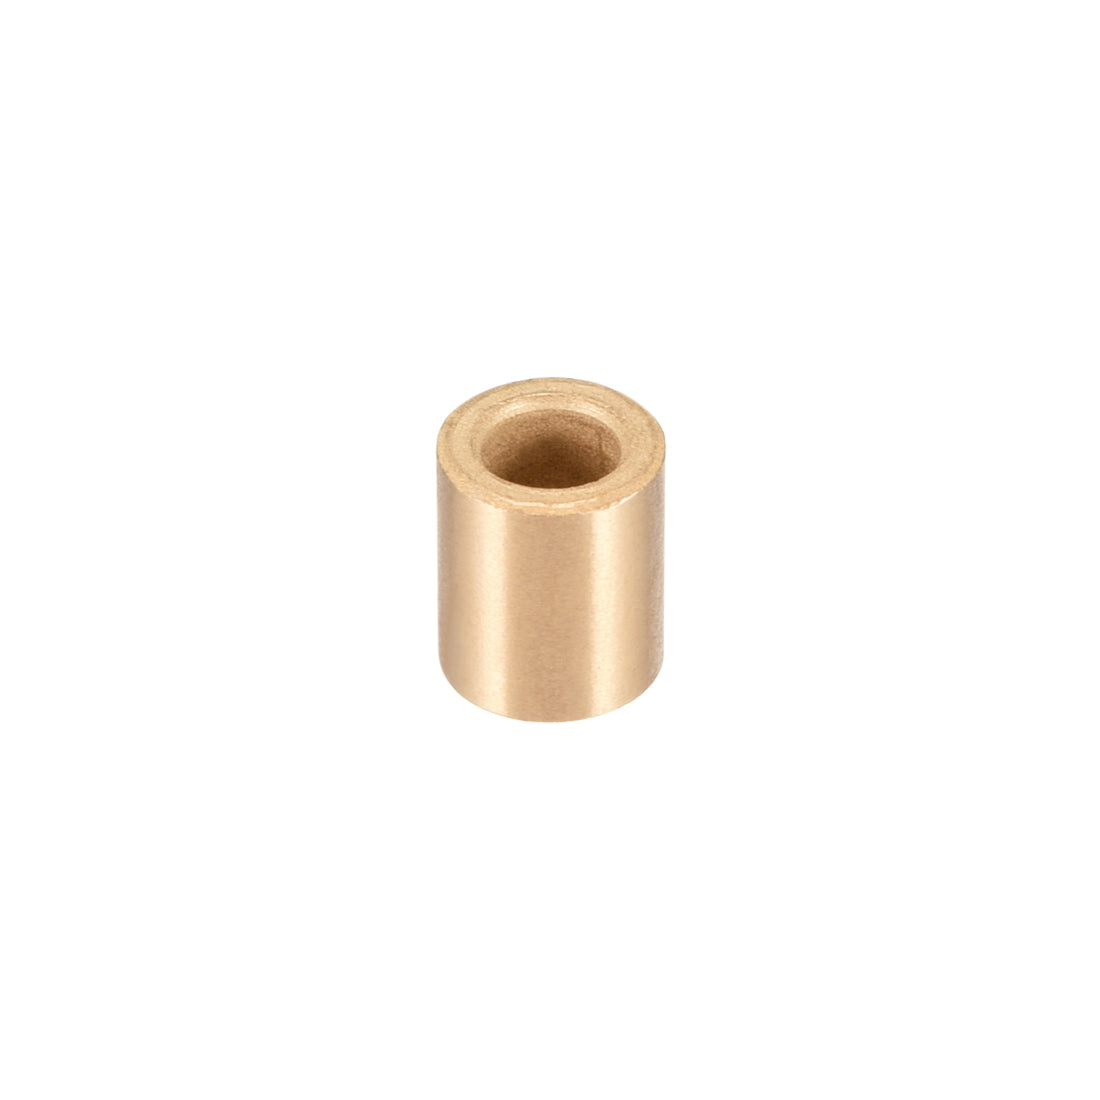 uxcell Uxcell Bearing Sleeve Bore Self-Lubricating Sintered Bronze Bushings